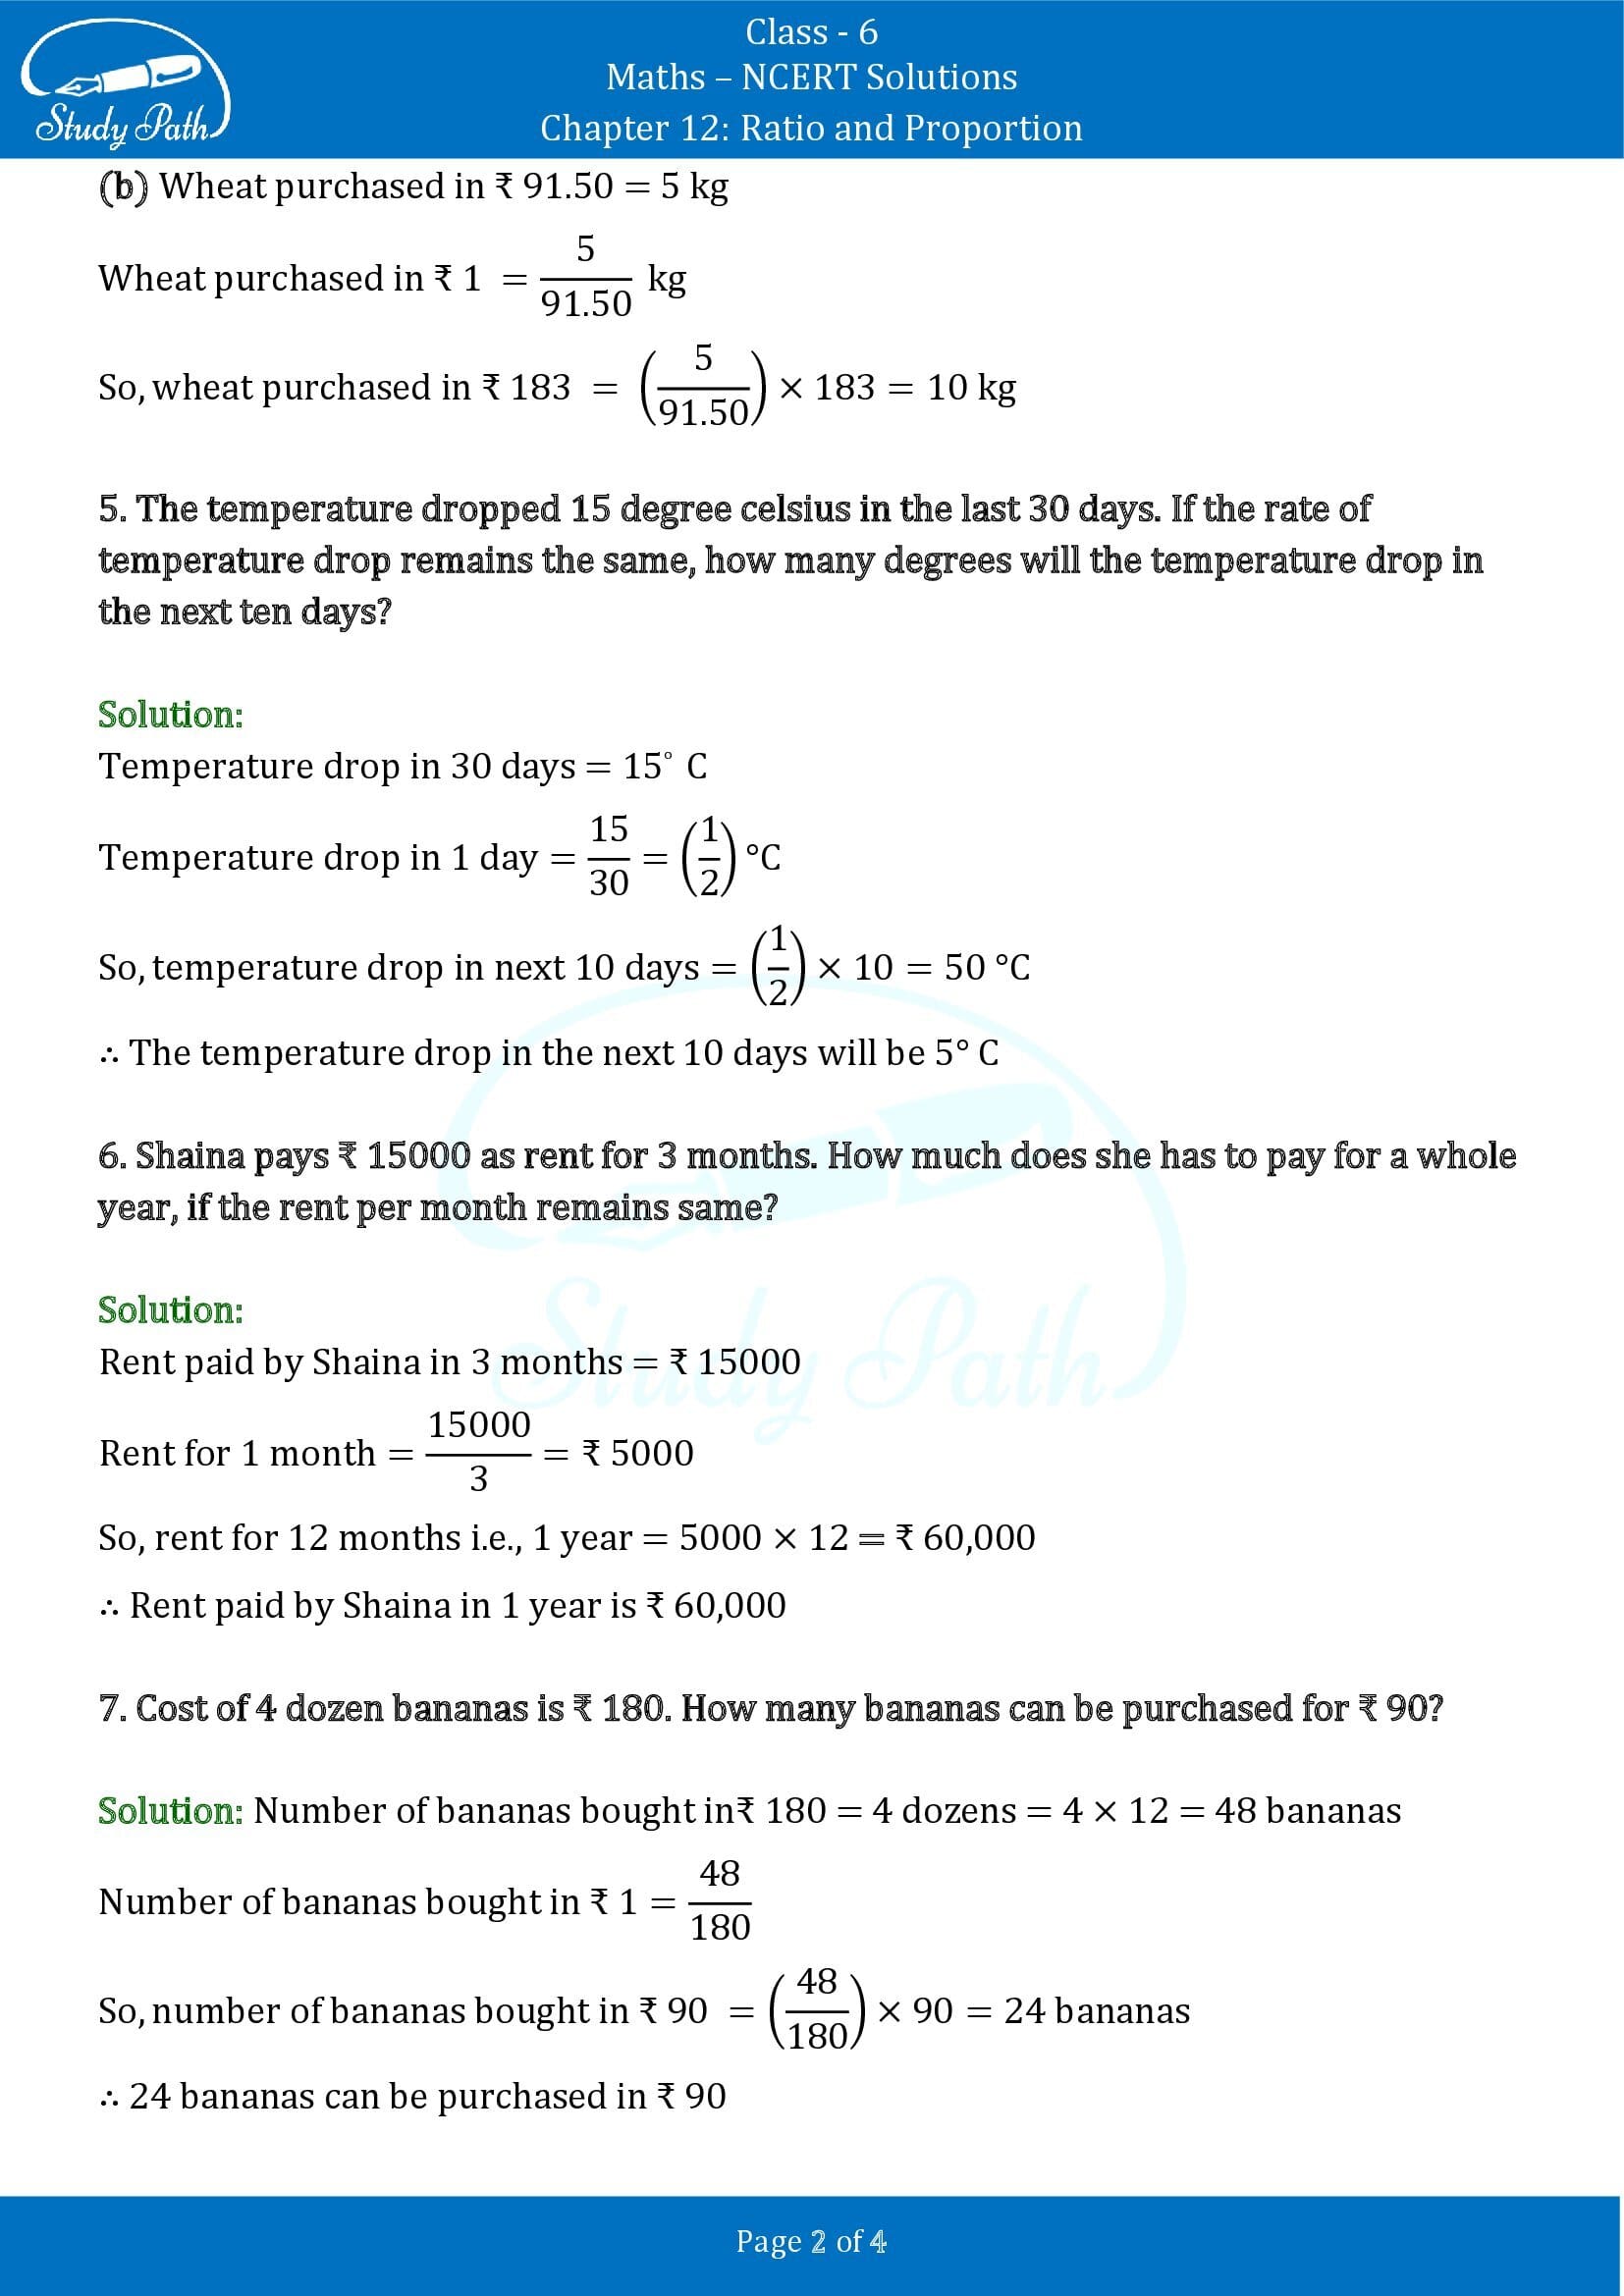 NCERT Solutions for Class 6 Maths Chapter 12 Ratio and Proportion Exercise 12.3 00002